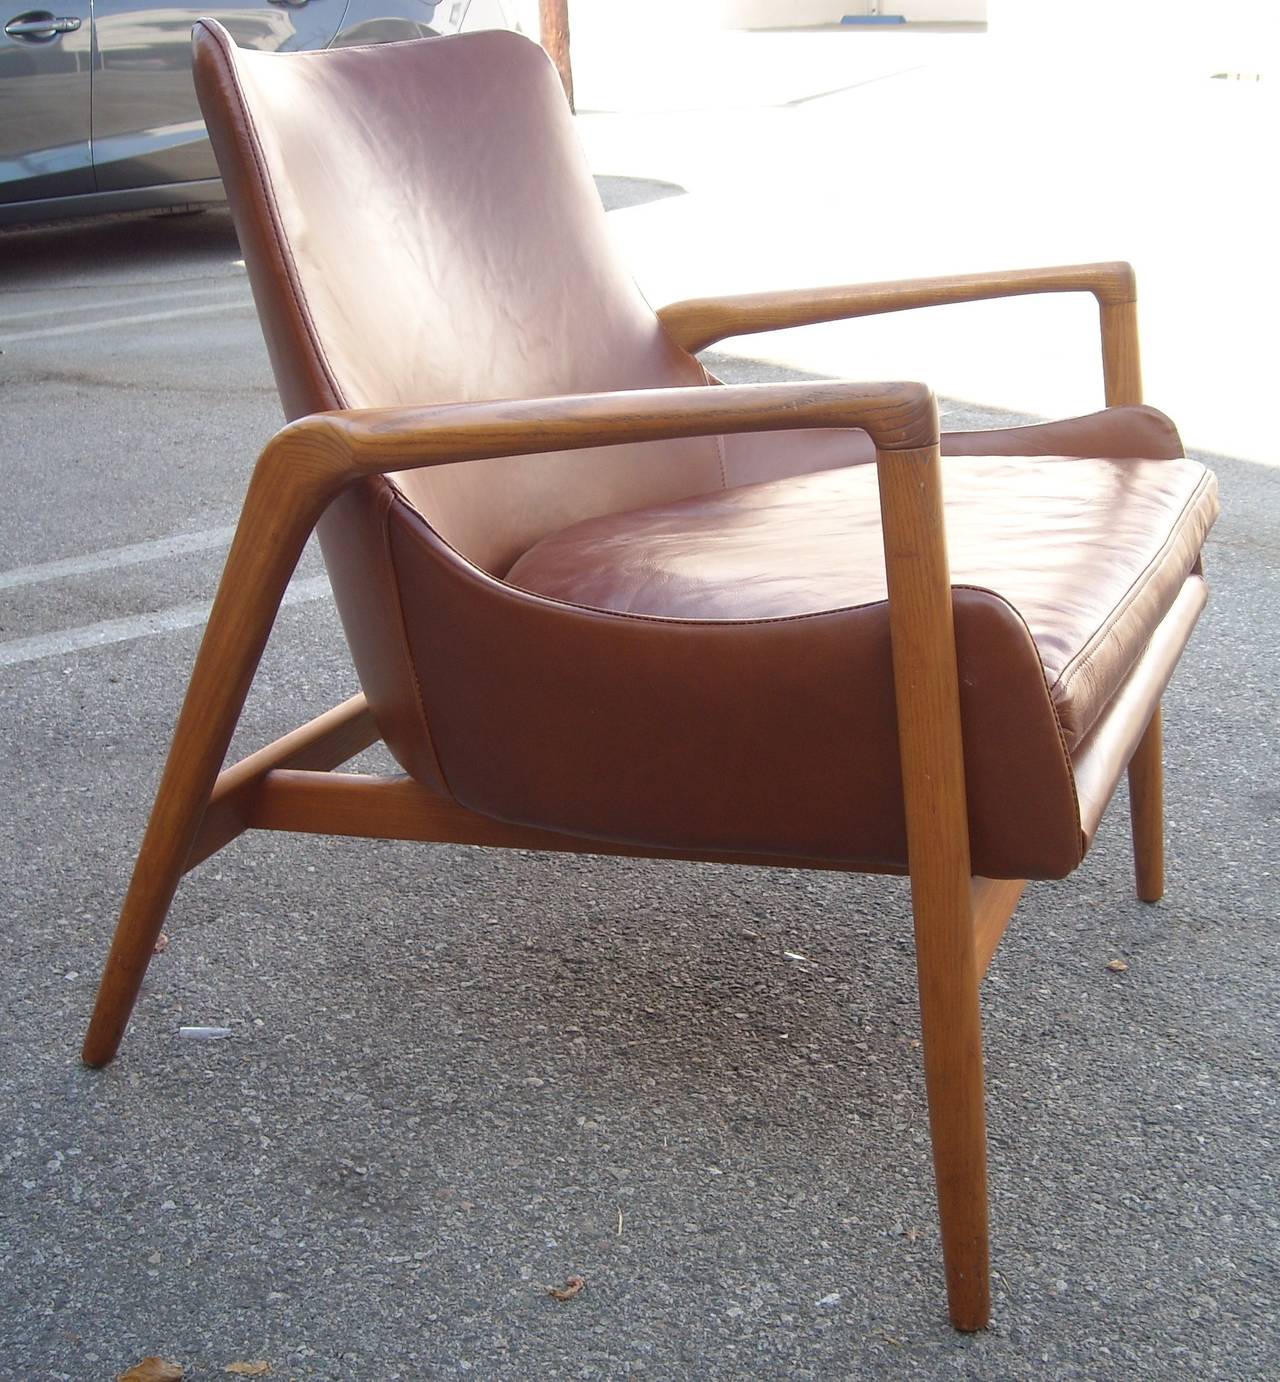 Very nice and elegant modern design in this "easy chair" by IB Kofod-Larsen. New leather in a caramel color / light brown.